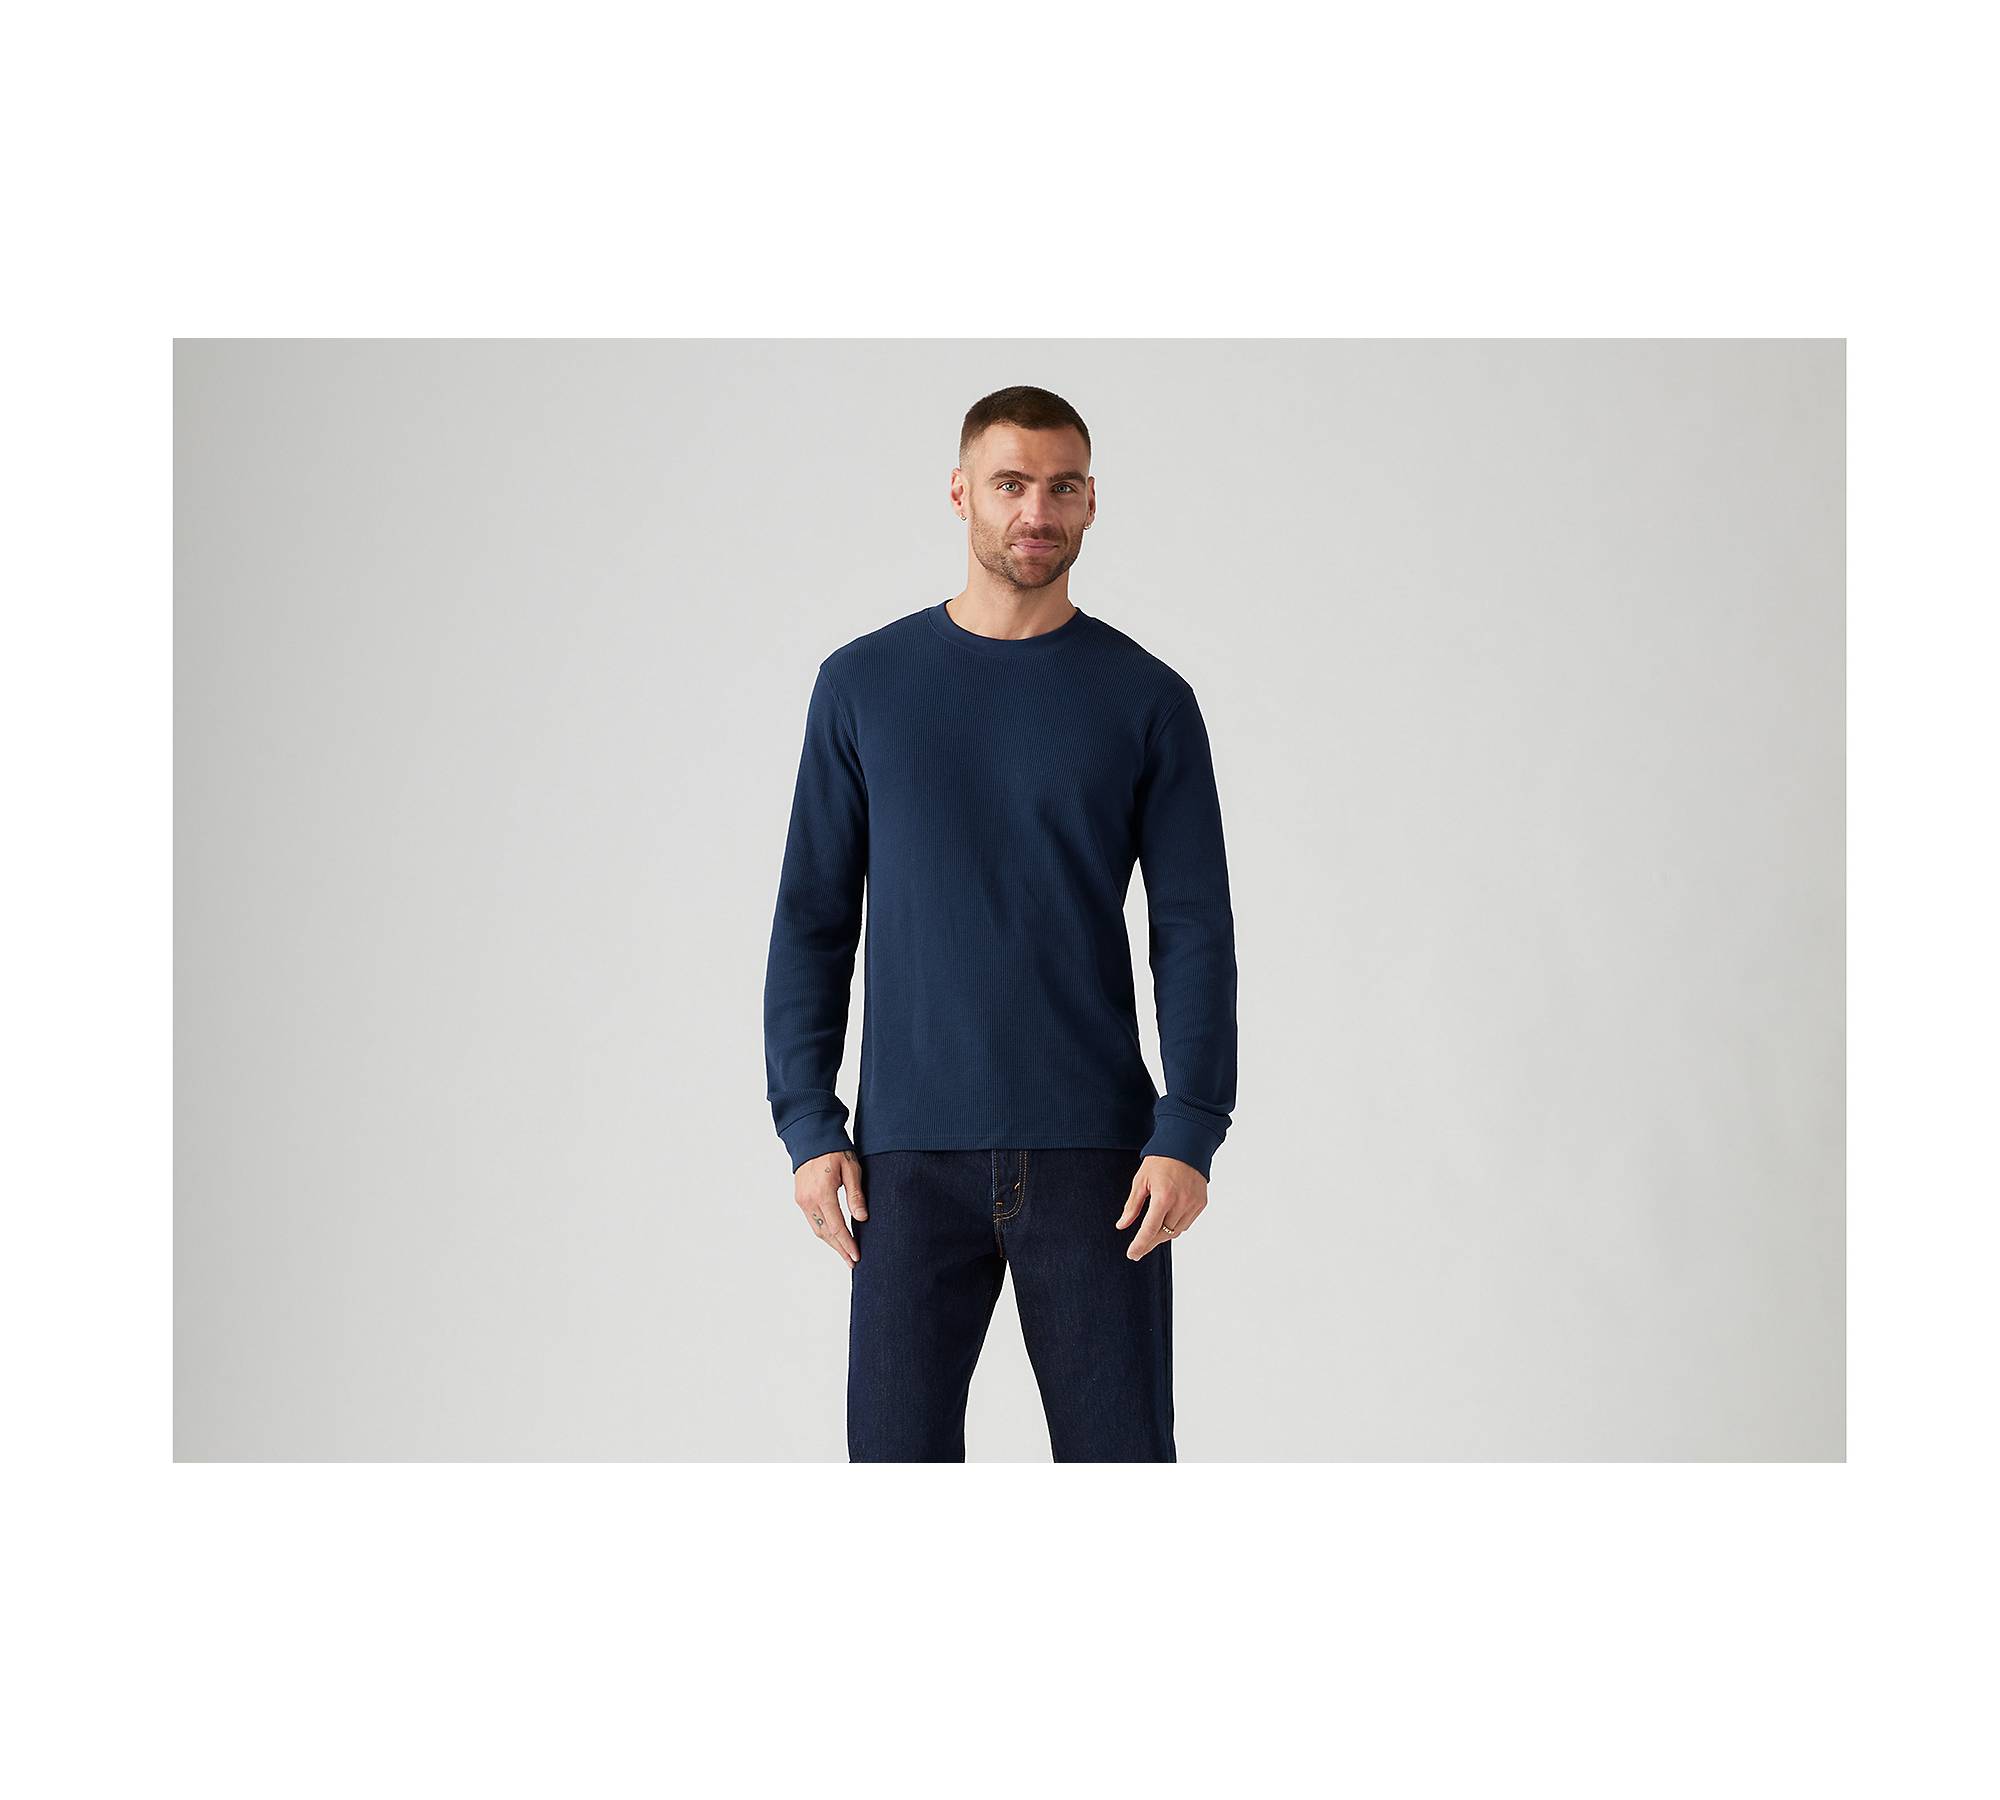 Long Sleeve Standard Fit Thermal Shirt 1